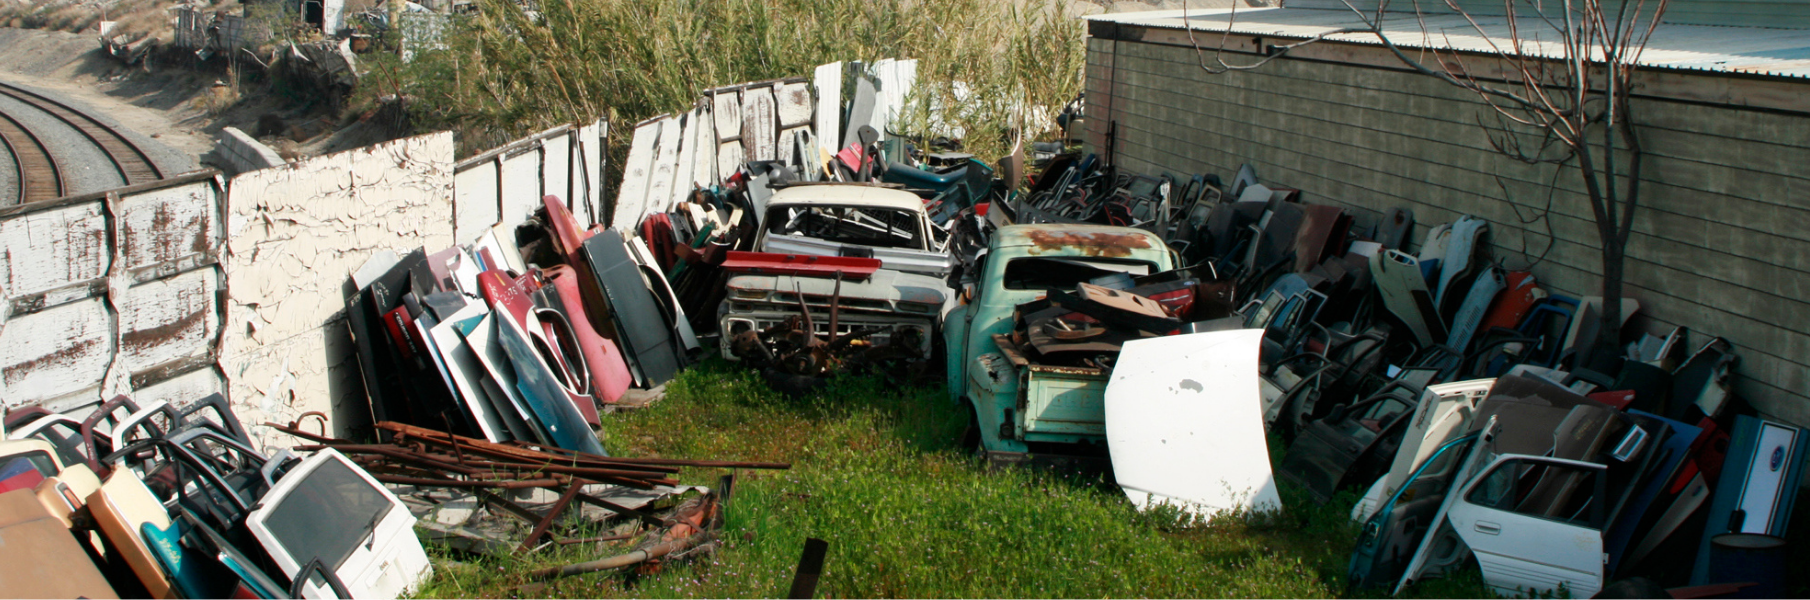 Several old cars and car parts in a junkyard